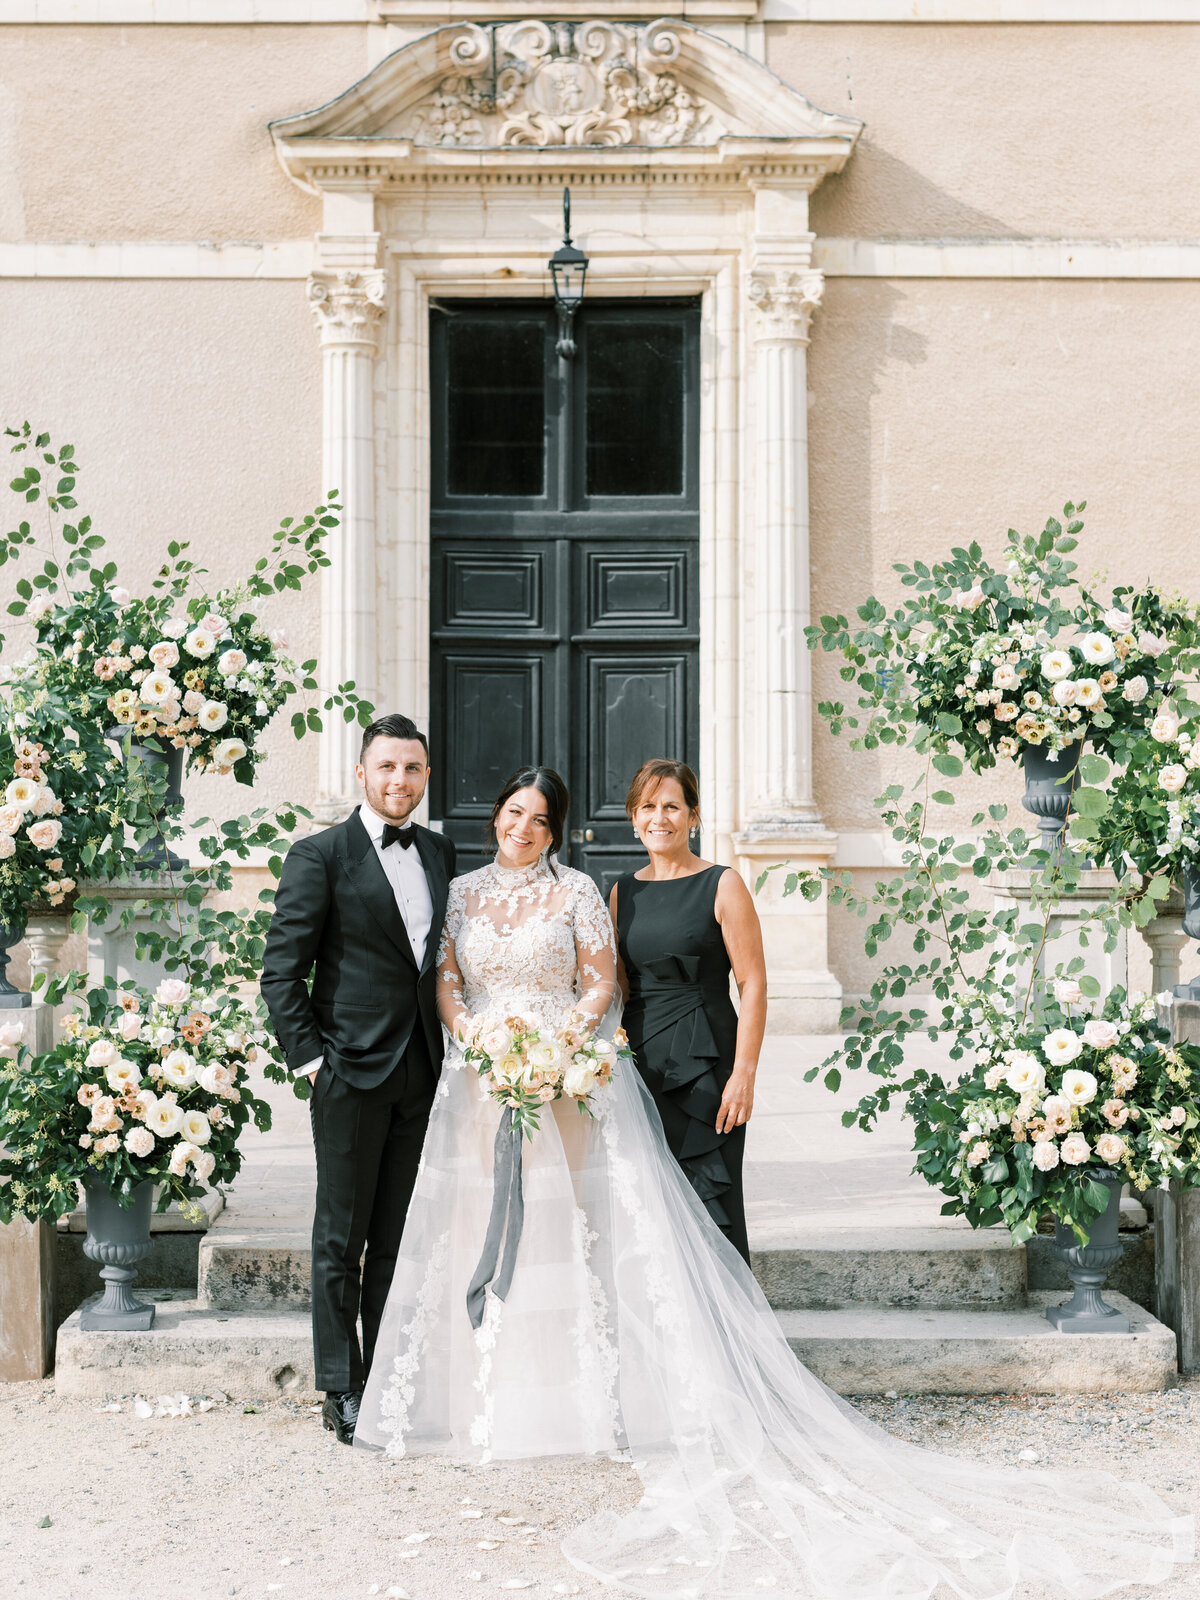 Jennifer Fox Weddings English speaking wedding planning & design agency in France crafting refined and bespoke weddings and celebrations Provence, Paris and destination Molly-Carr-Photography-Natalie-Ryan-Ceremony-5_lS5